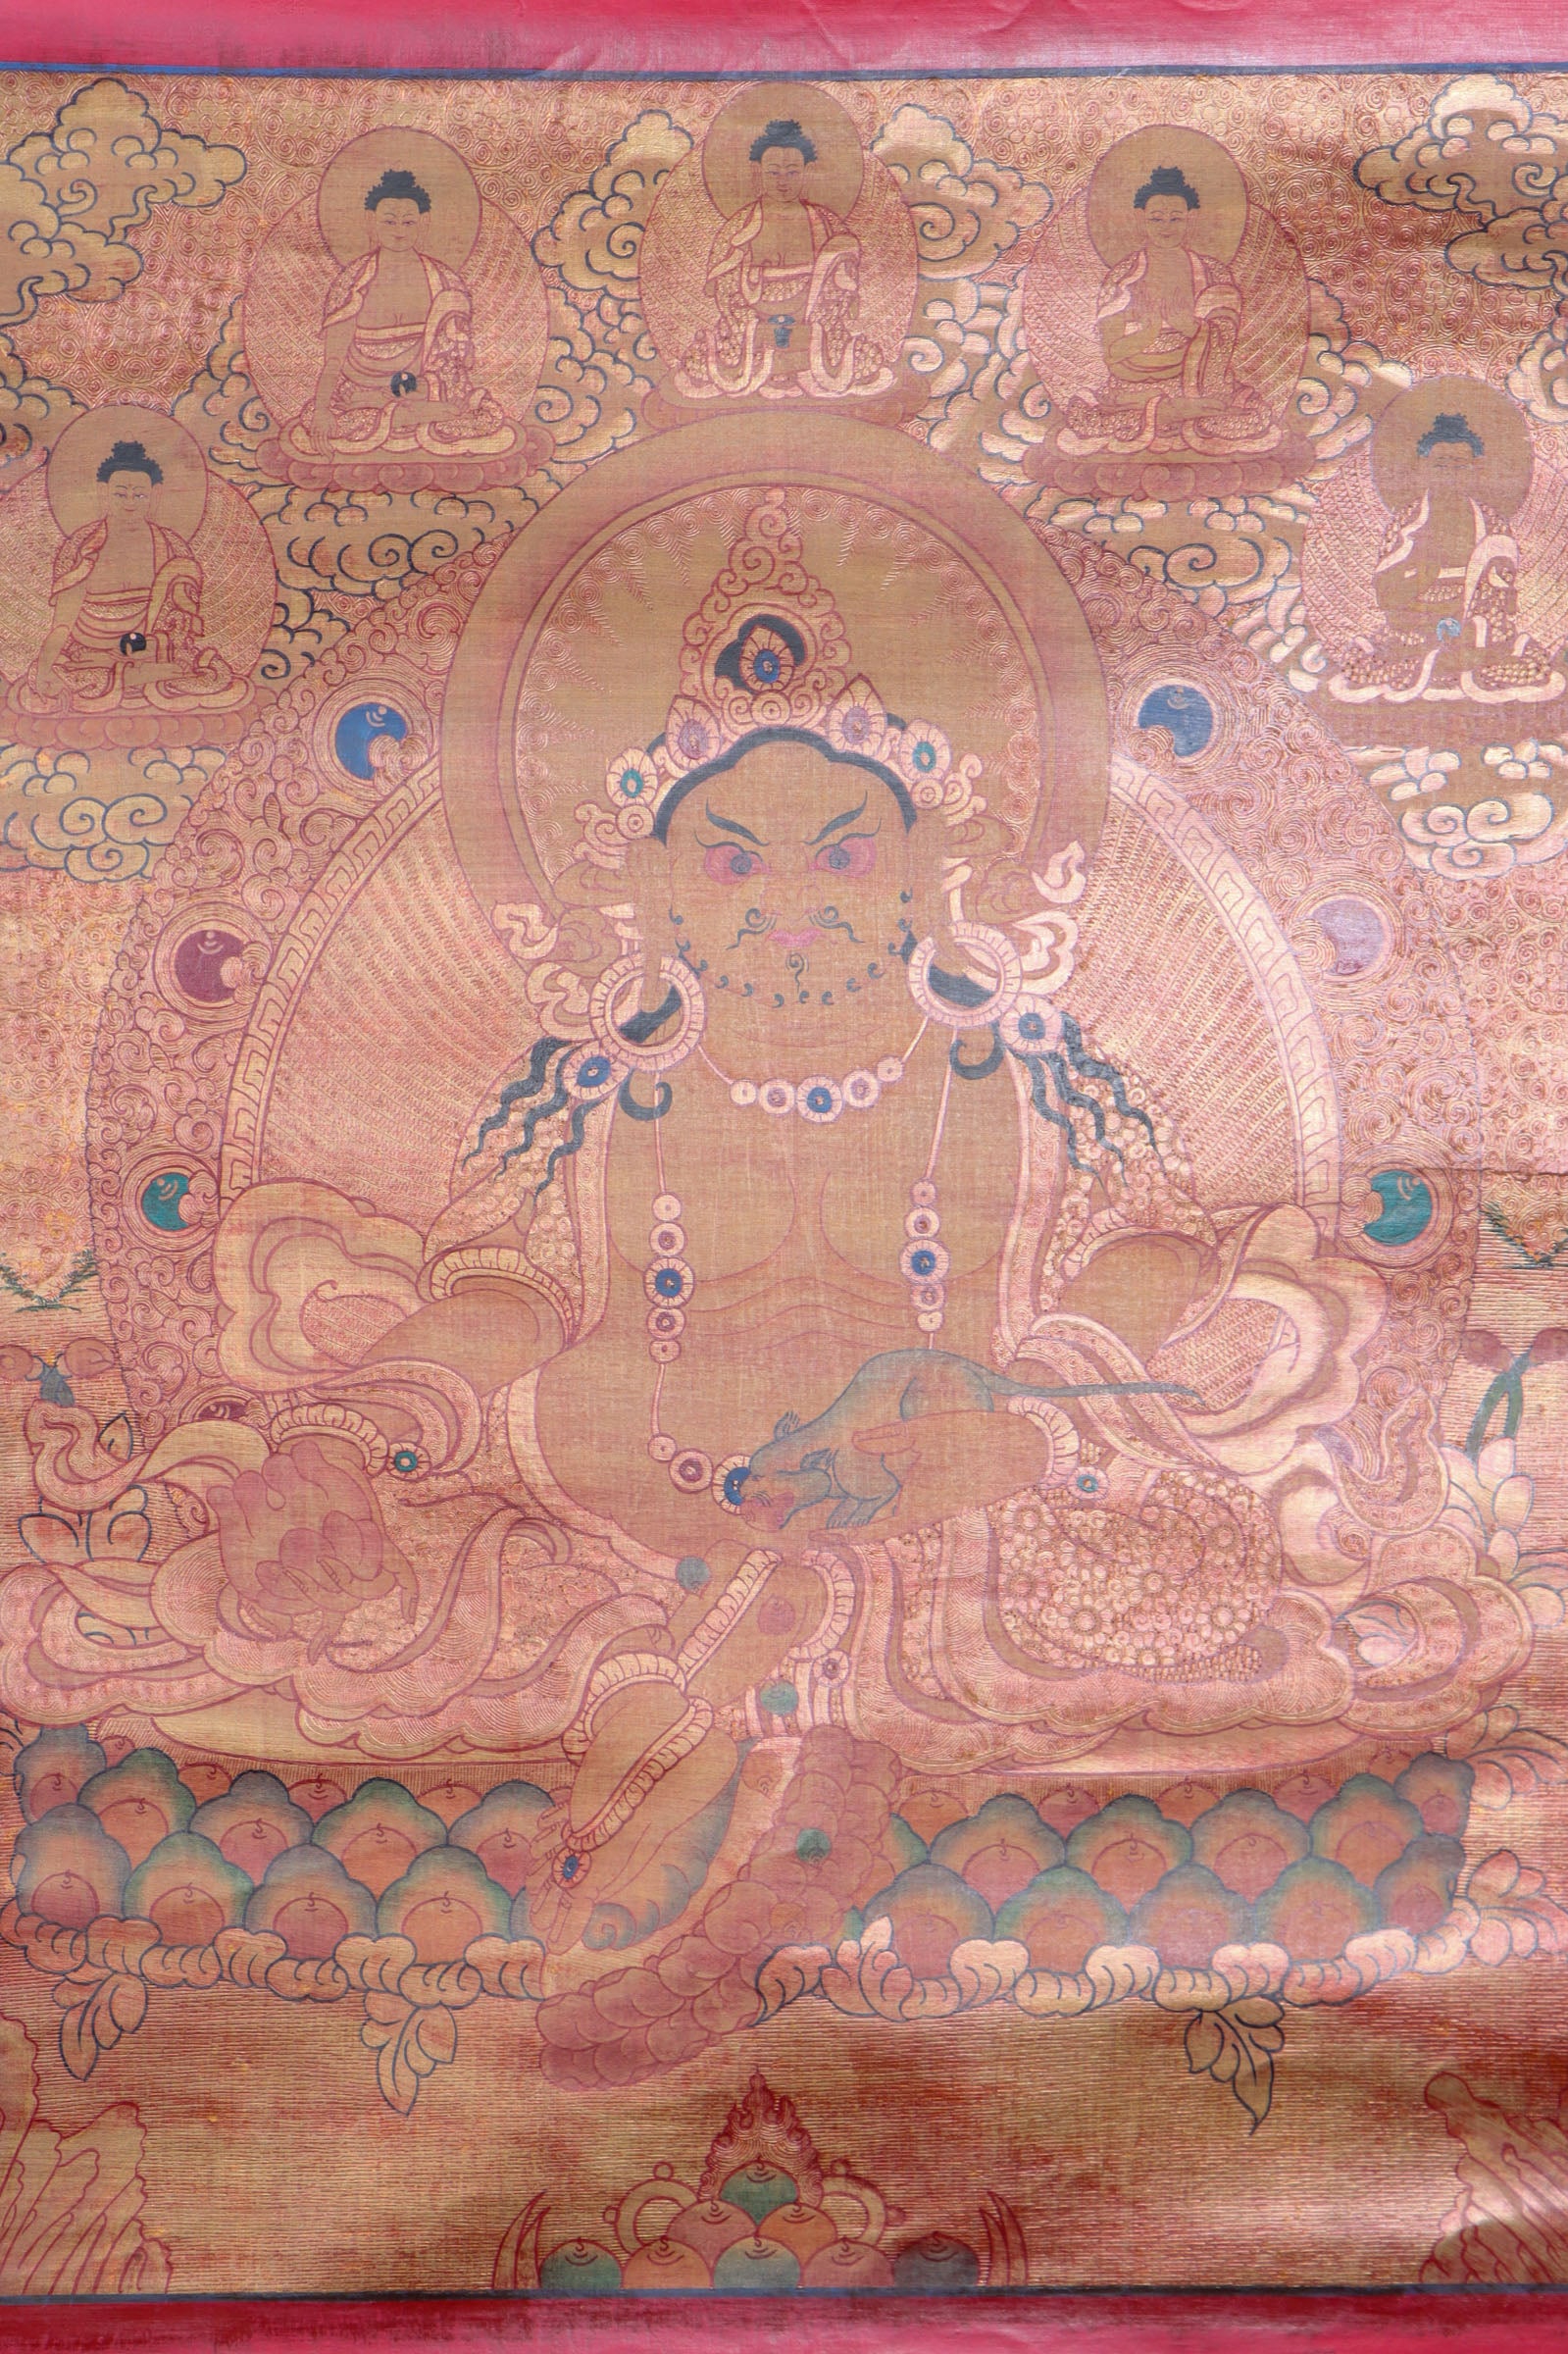 Antique Zambala Thangka Painting for wealth and prosperity.